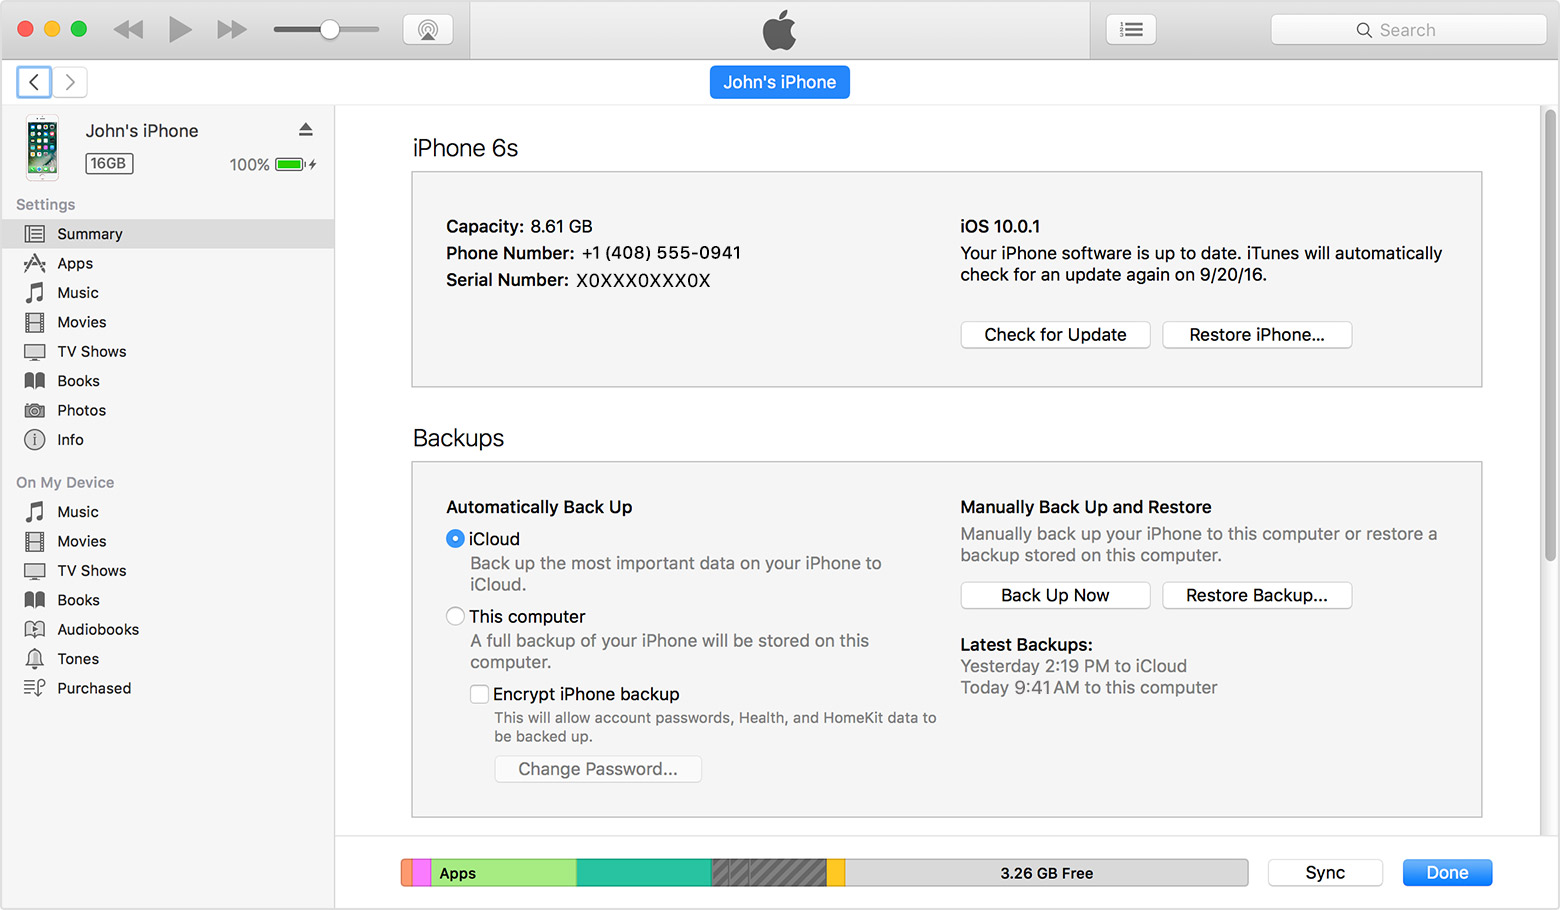 Make an iTunes backup of your iPhone, iPad, or iPod touch